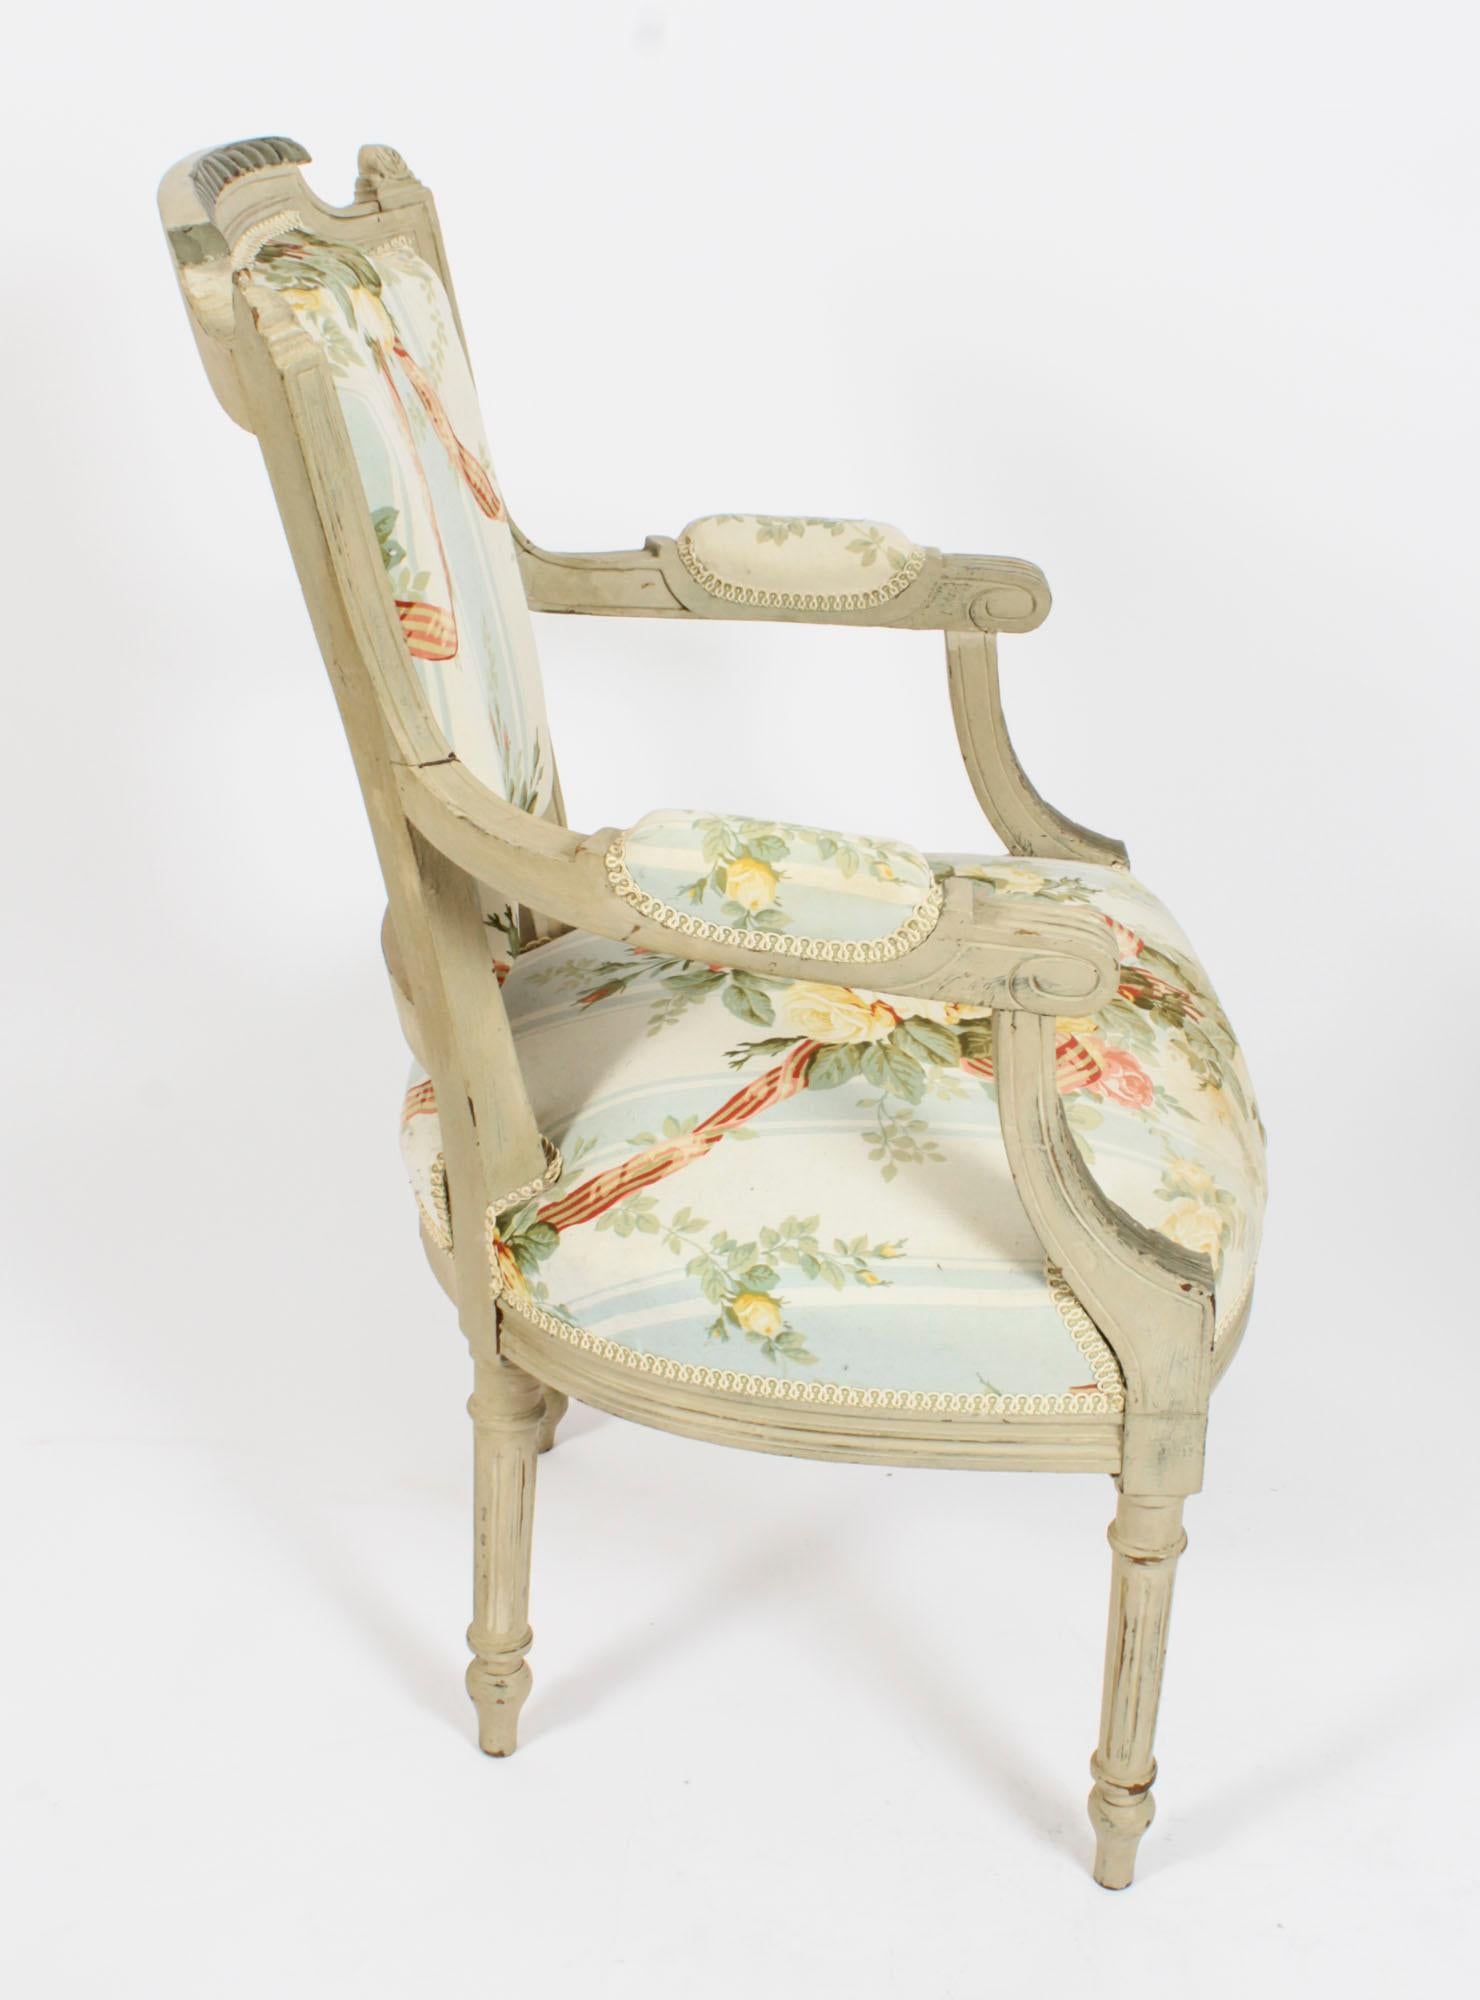 Antique Pair French Louis XVI Revival Painted Fauteuil Armchairs, 19th Century For Sale 5